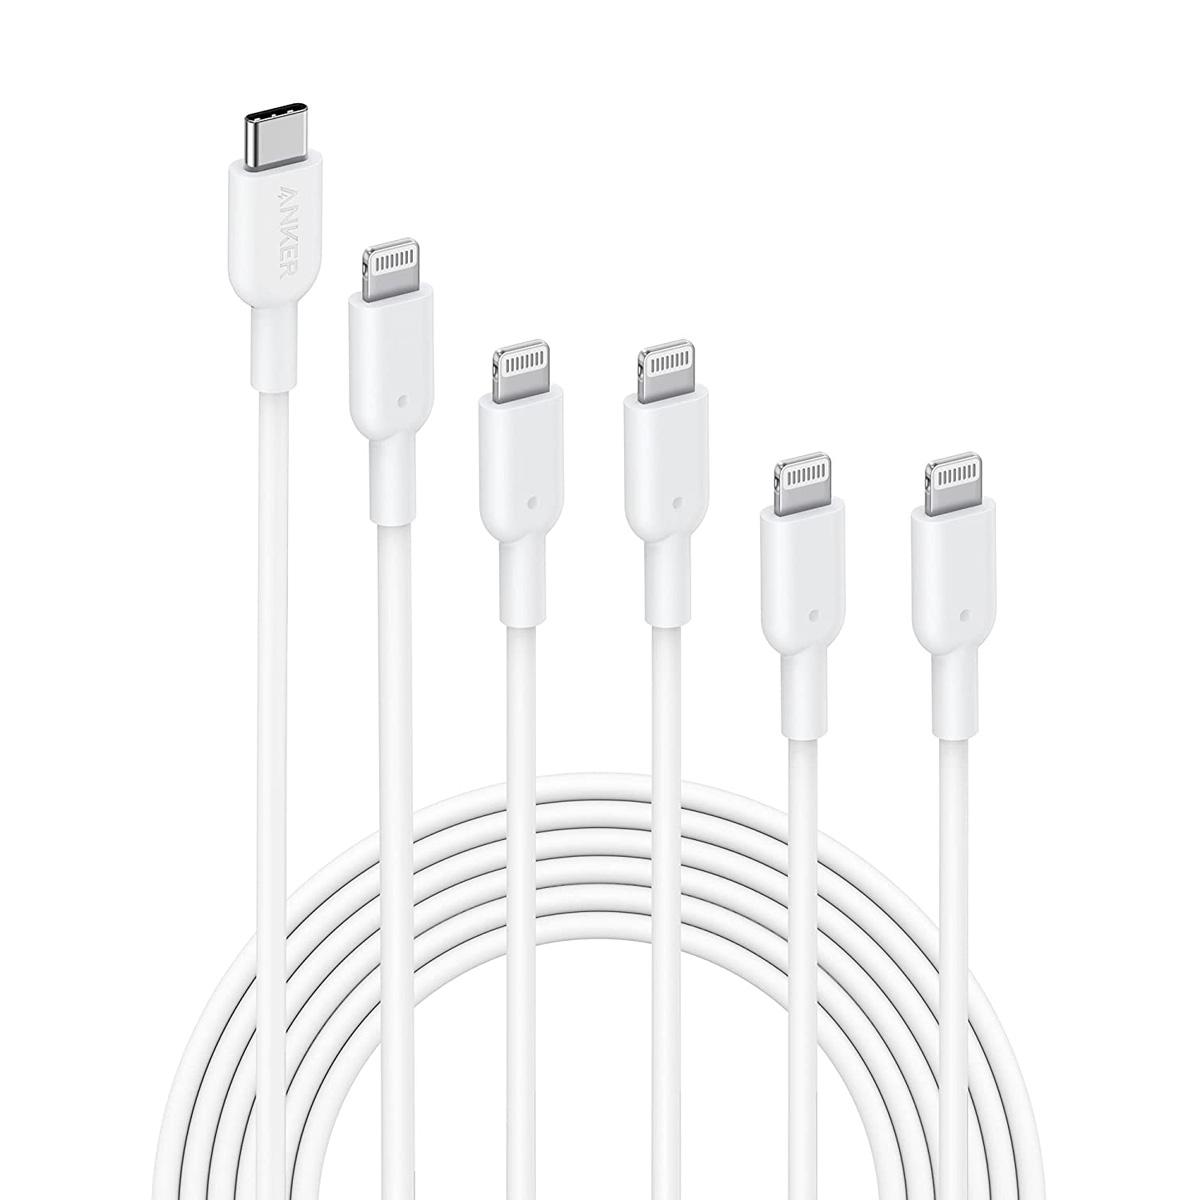 Anker USB-C to Lightning Cable 5 Pack for $25.52 Shipped